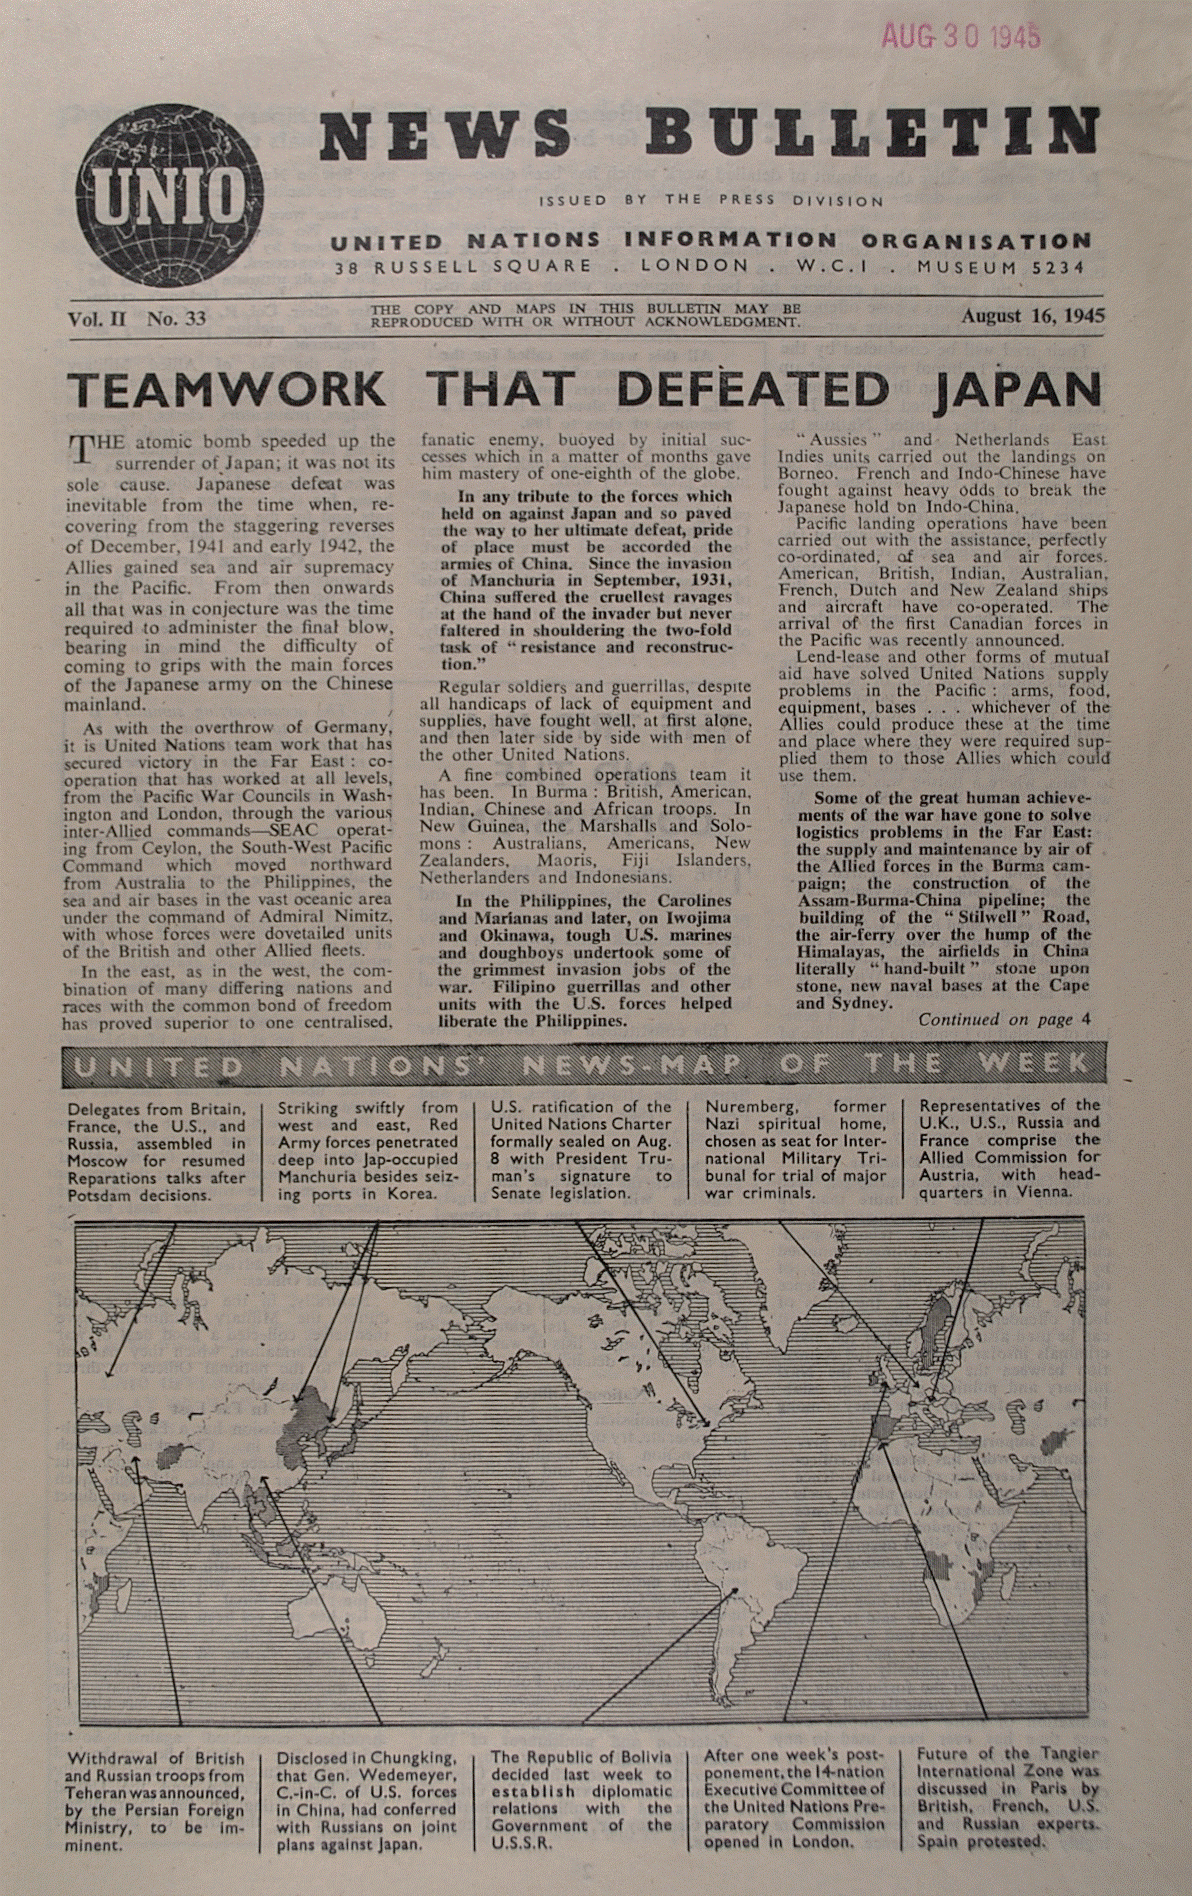 UN Origins Project Series, Part 4: In WWII, It Took Teamwork to Defeat Not Only Germany, But Japan